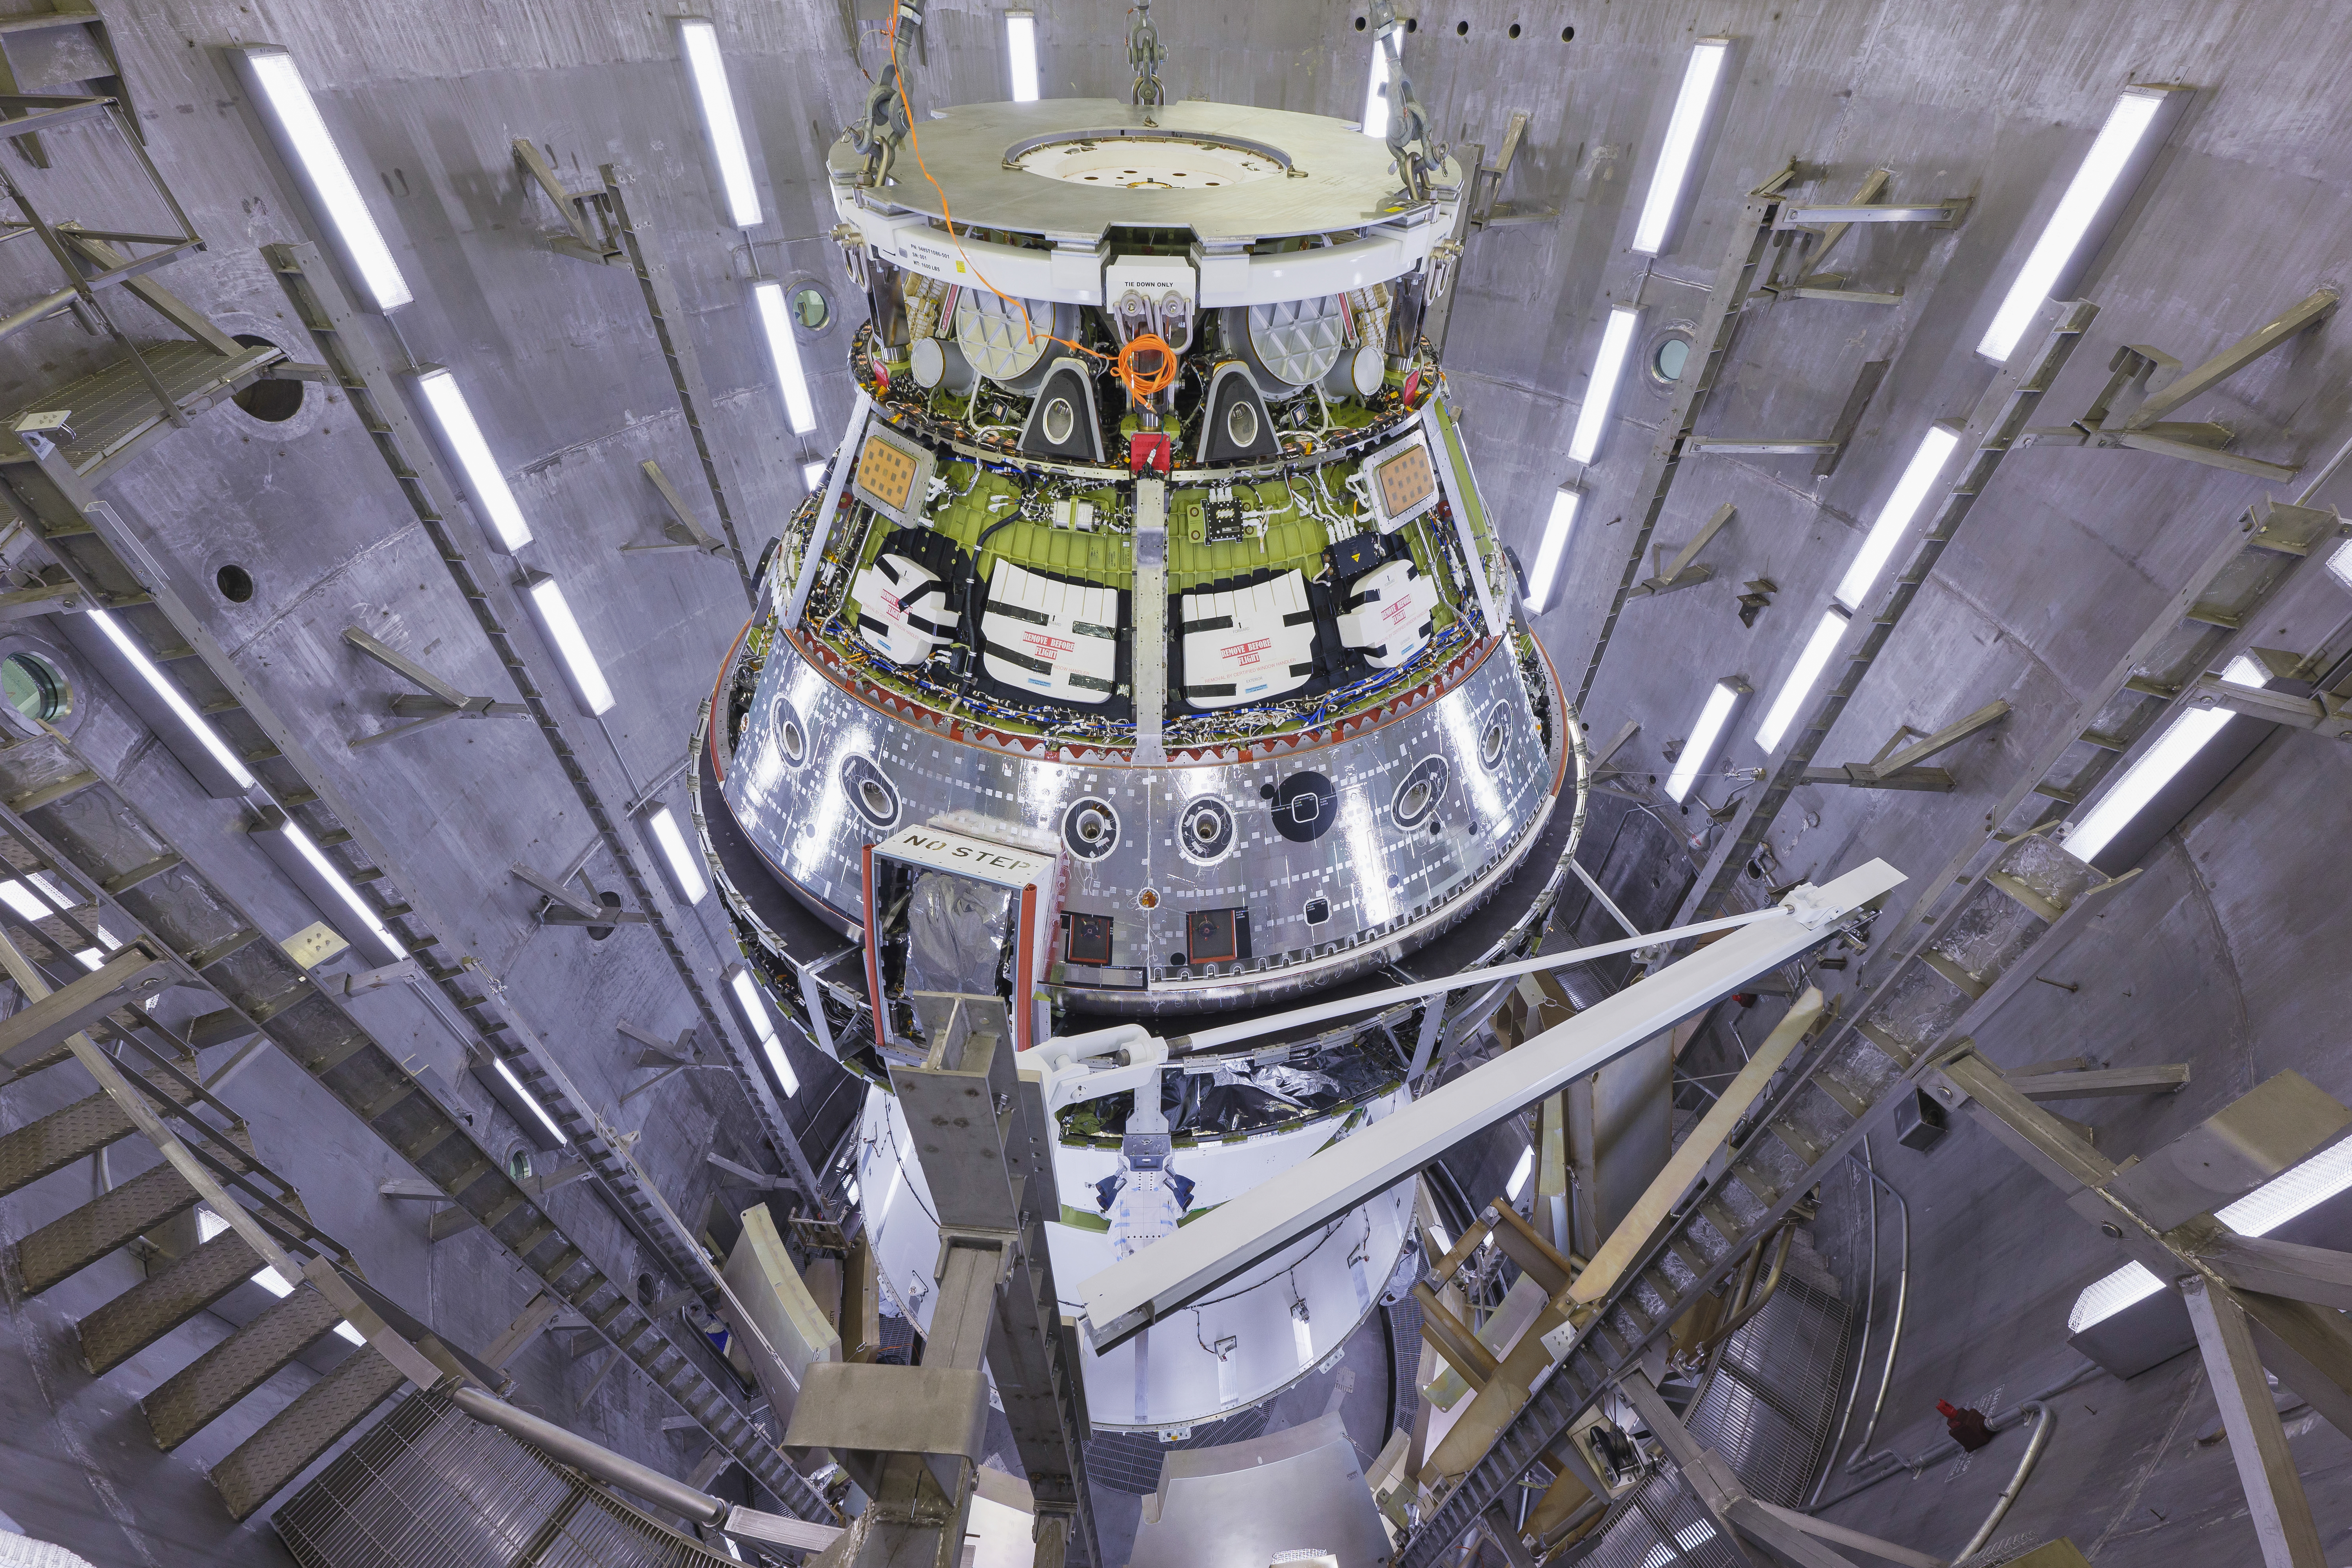 The Artemis II Orion spacecraft is pictured surrounded by the metal walls of the altitude chamber